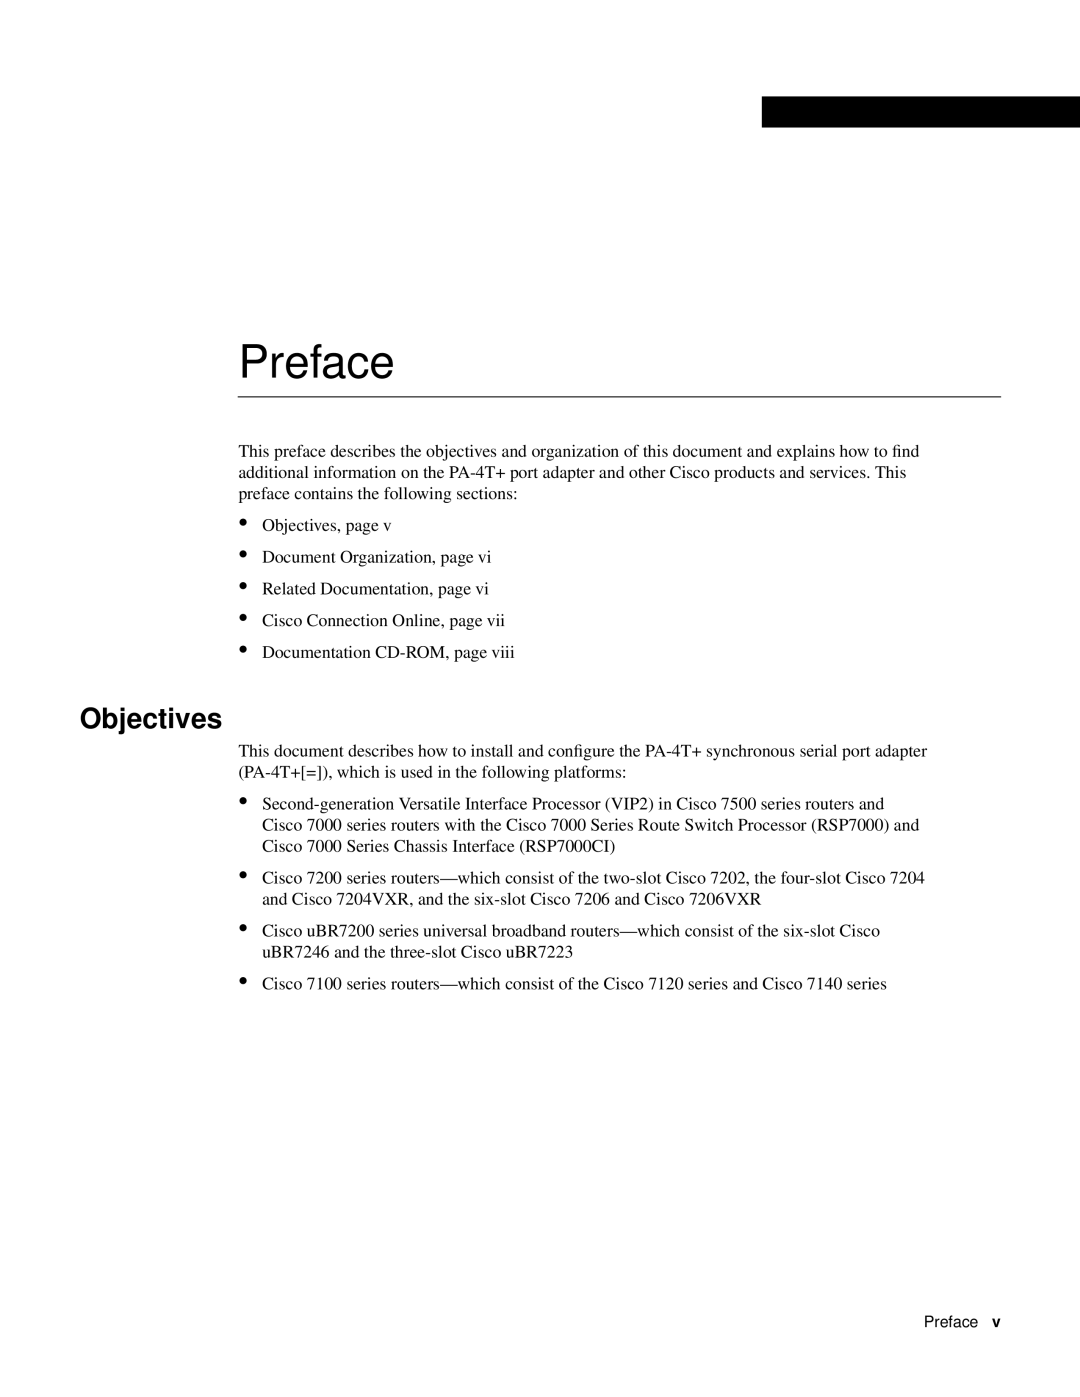 Cisco Systems PA-4T manual Preface, Objectives 